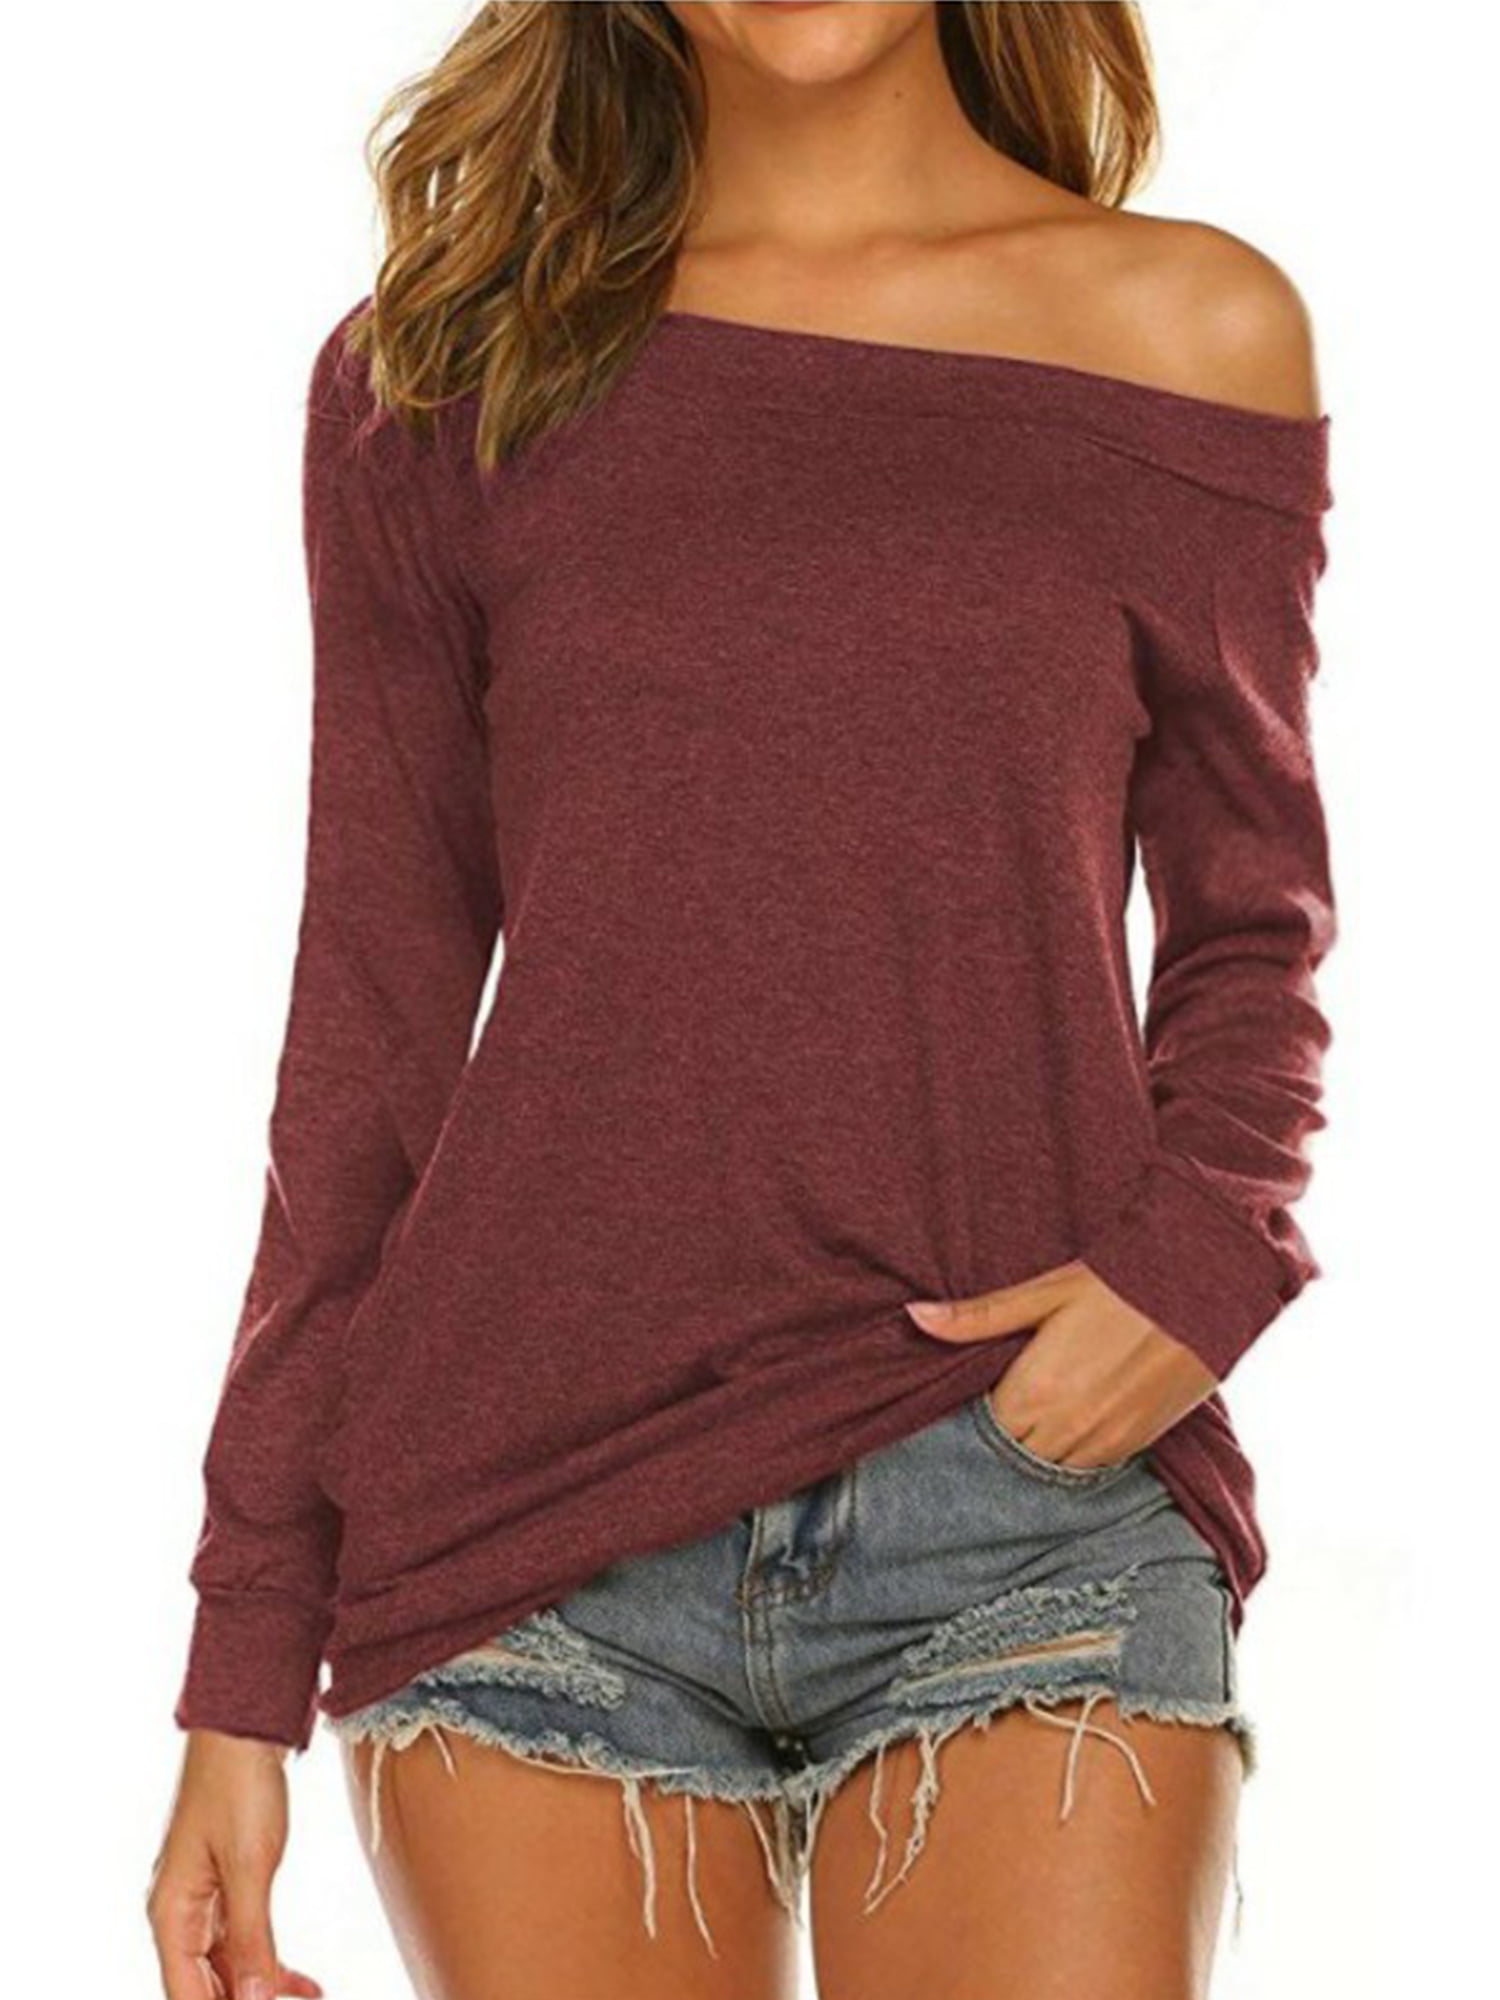 Dokotoo Women's Off The Shoulder Batwing Long Sleeve Sweatshirt Casual Loose Pullover Tops 